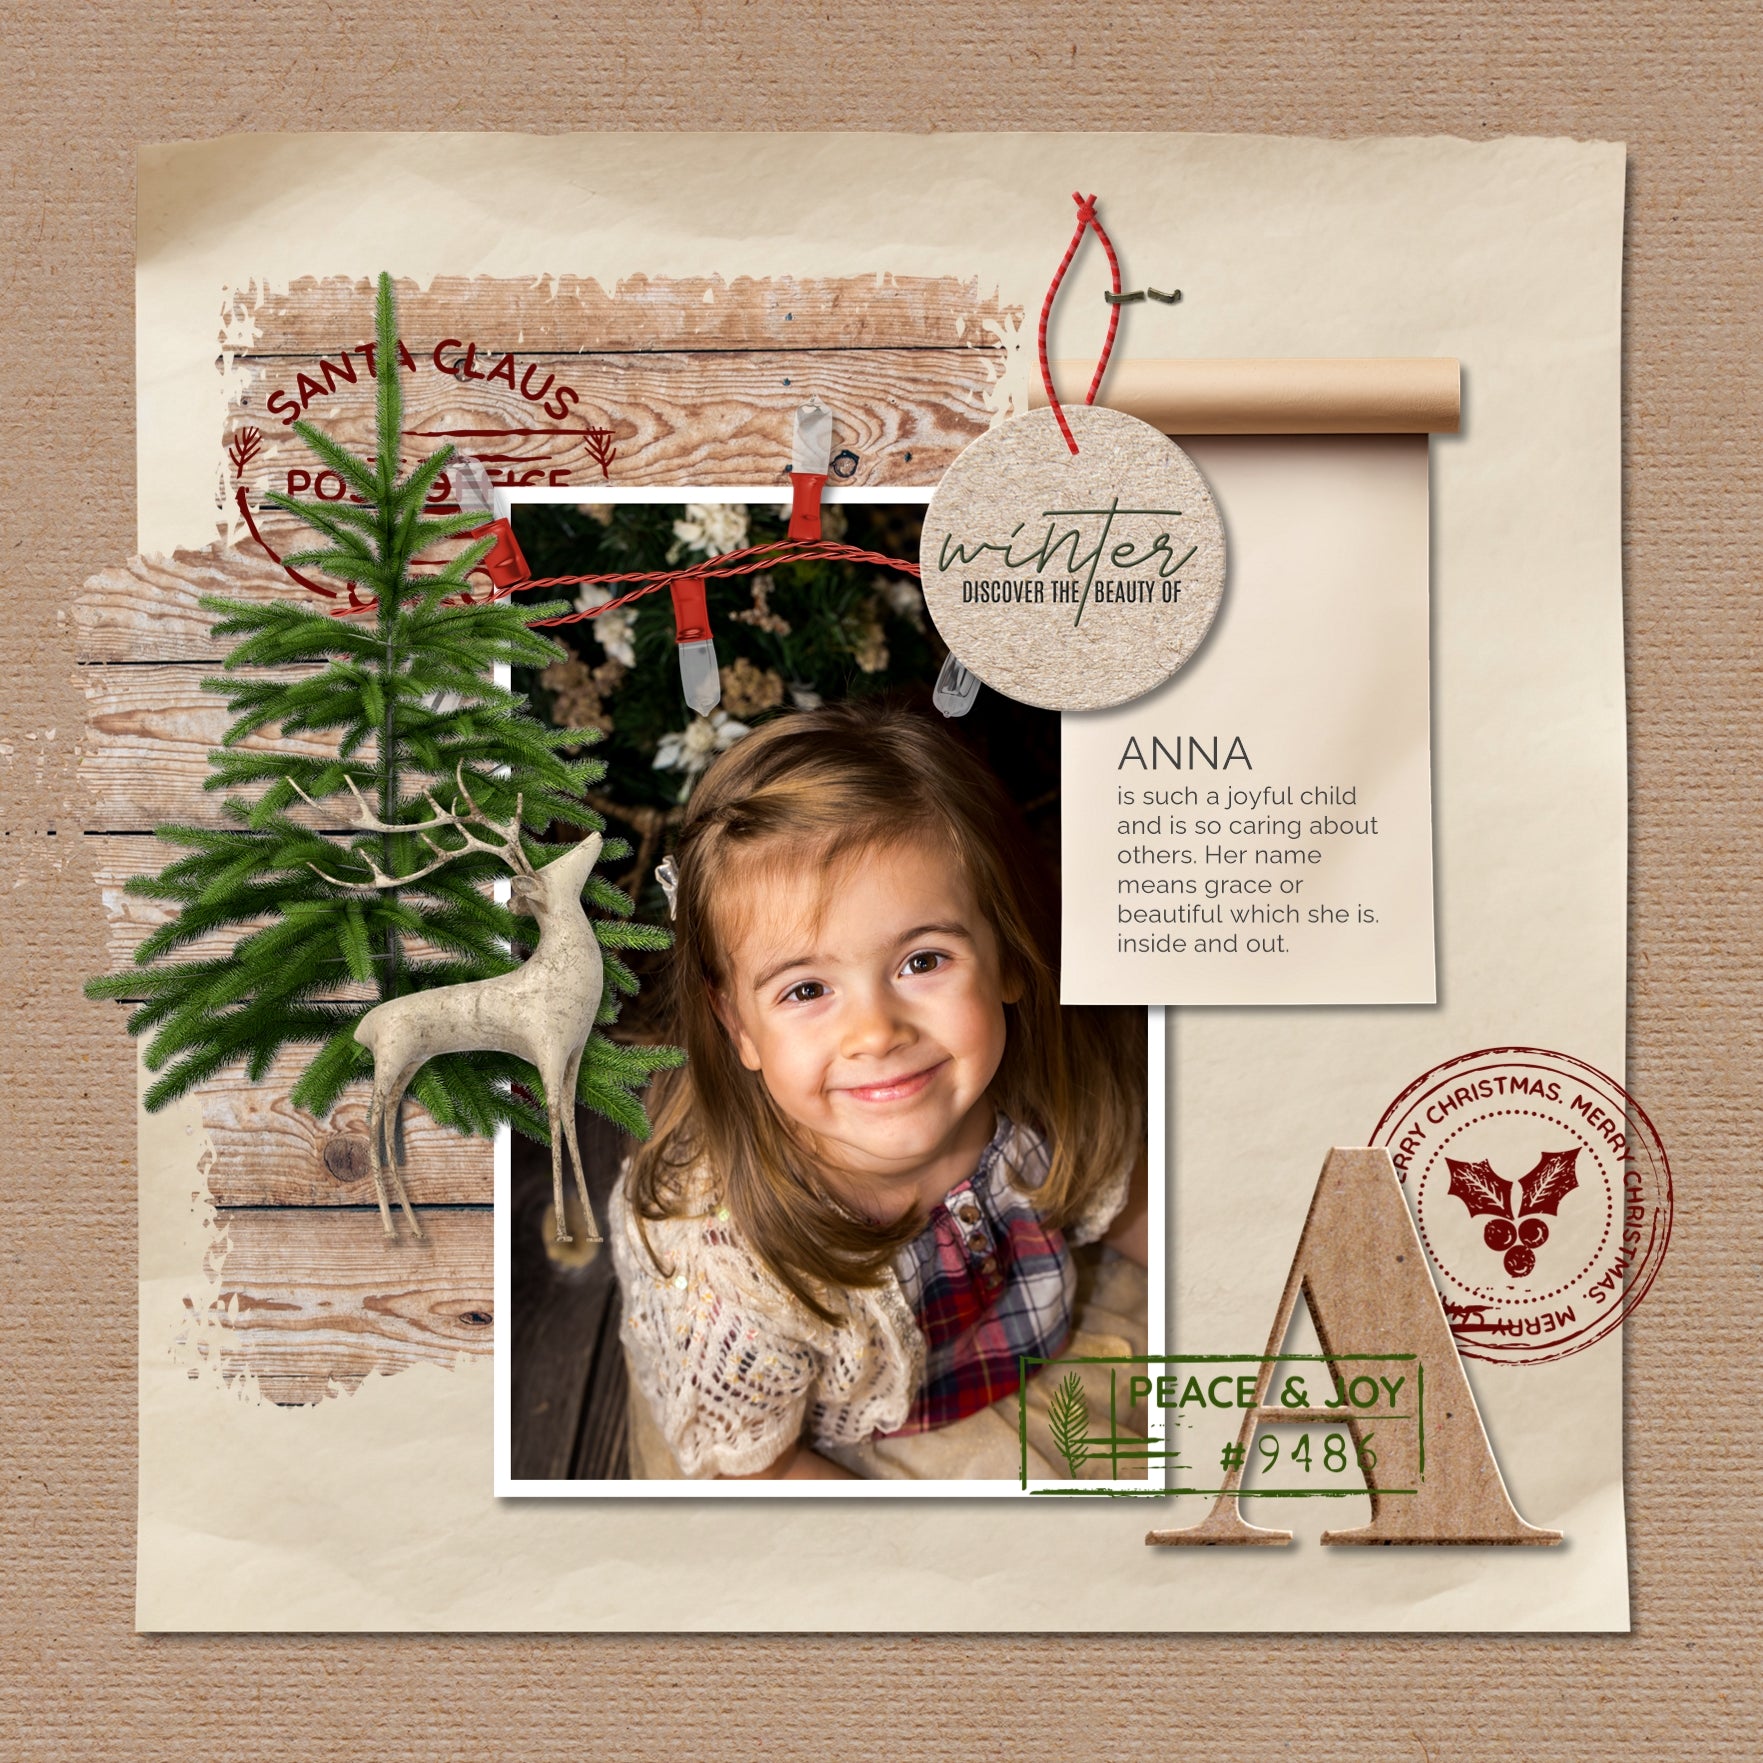 Accent your digital scrapbook pages with warm, grunge Christmas postmarks by Lucky Girl Creative. Designed as post office cancellation stamps, these digital art embellishments have a transparent background are great for layering on all your Christmas and winter projects. Stamps include North Pole, Santa Claus, Merry Christmas, Peace & Joy, Happy New Year, Special Gift, Dec 25, and With Love. Some stamps have accents of evergreen, pine, poinsettia, berries, and holly.